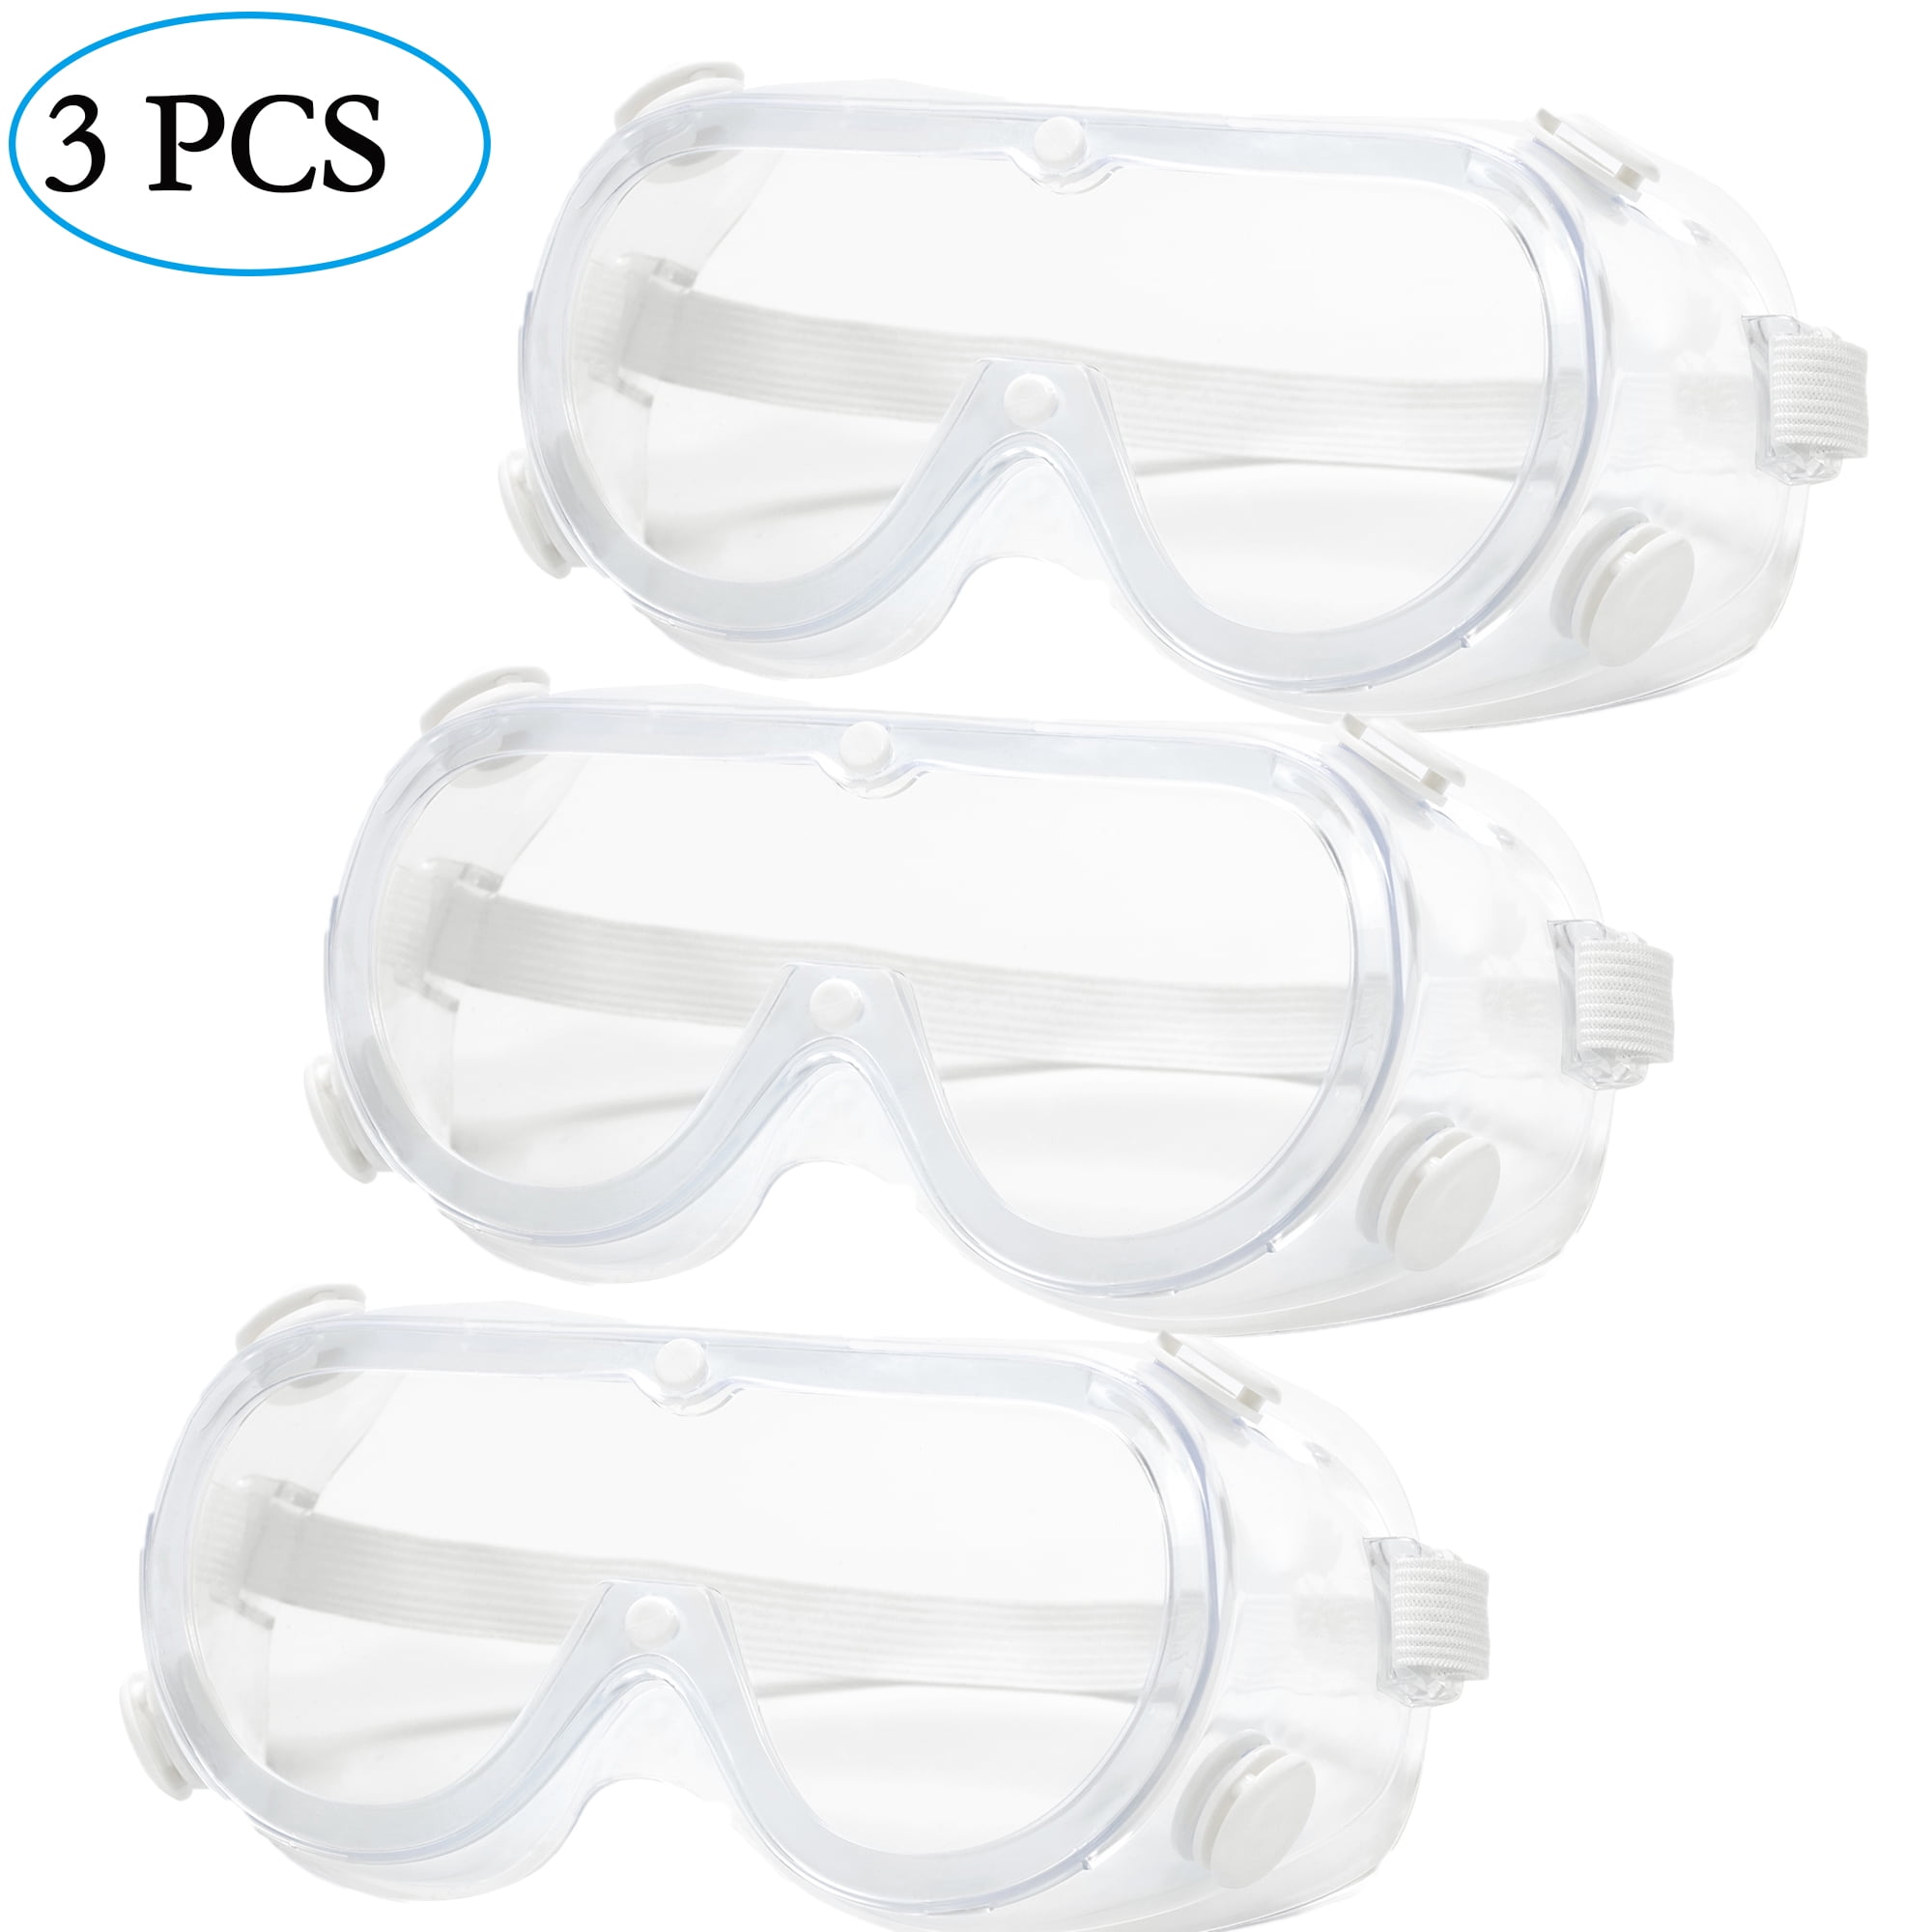 3pcs Protective Eyewear Safety Goggles Anti Fog Dust Suitable For School Workplace Laboratory